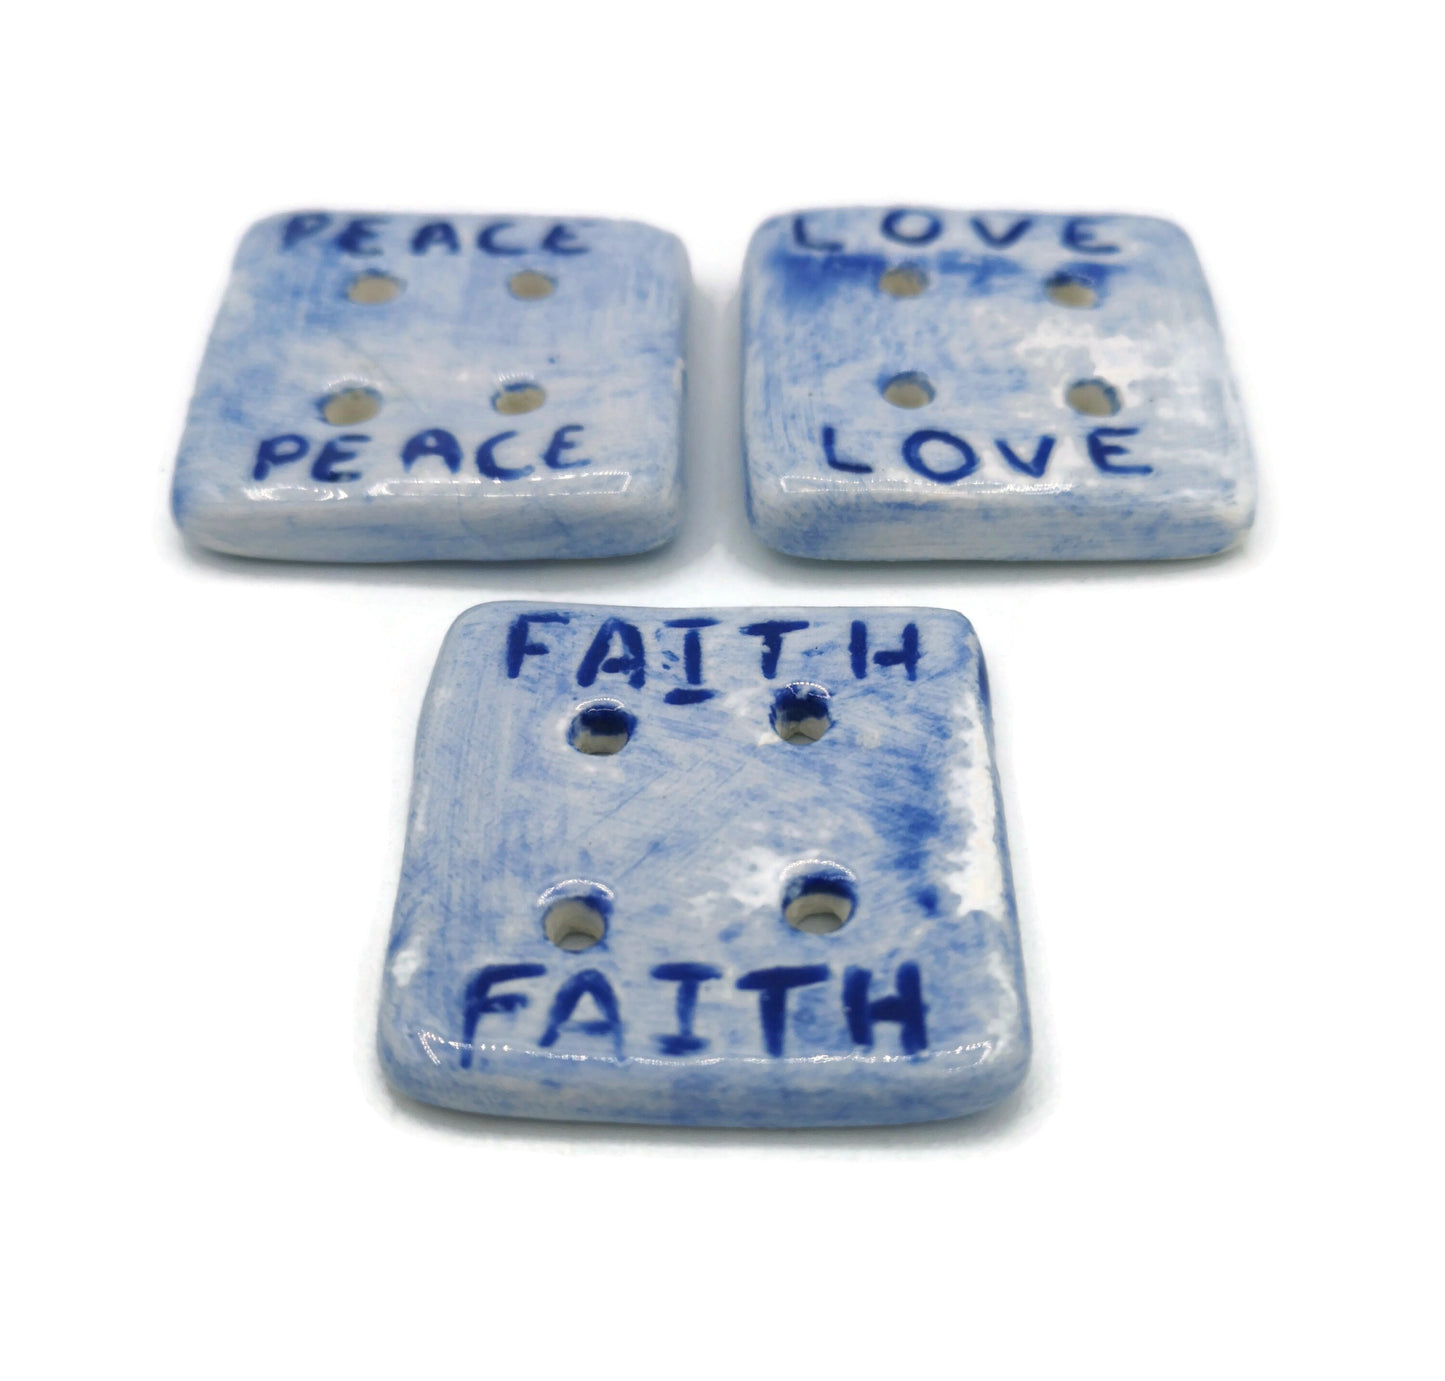 3Pc Extra Large Square Blue Ceramic Sewing Buttons Lot, Novelty Decorative Positive Words Sewing Supplies And Notions, Cute Gifts For Her - Ceramica Ana Rafael